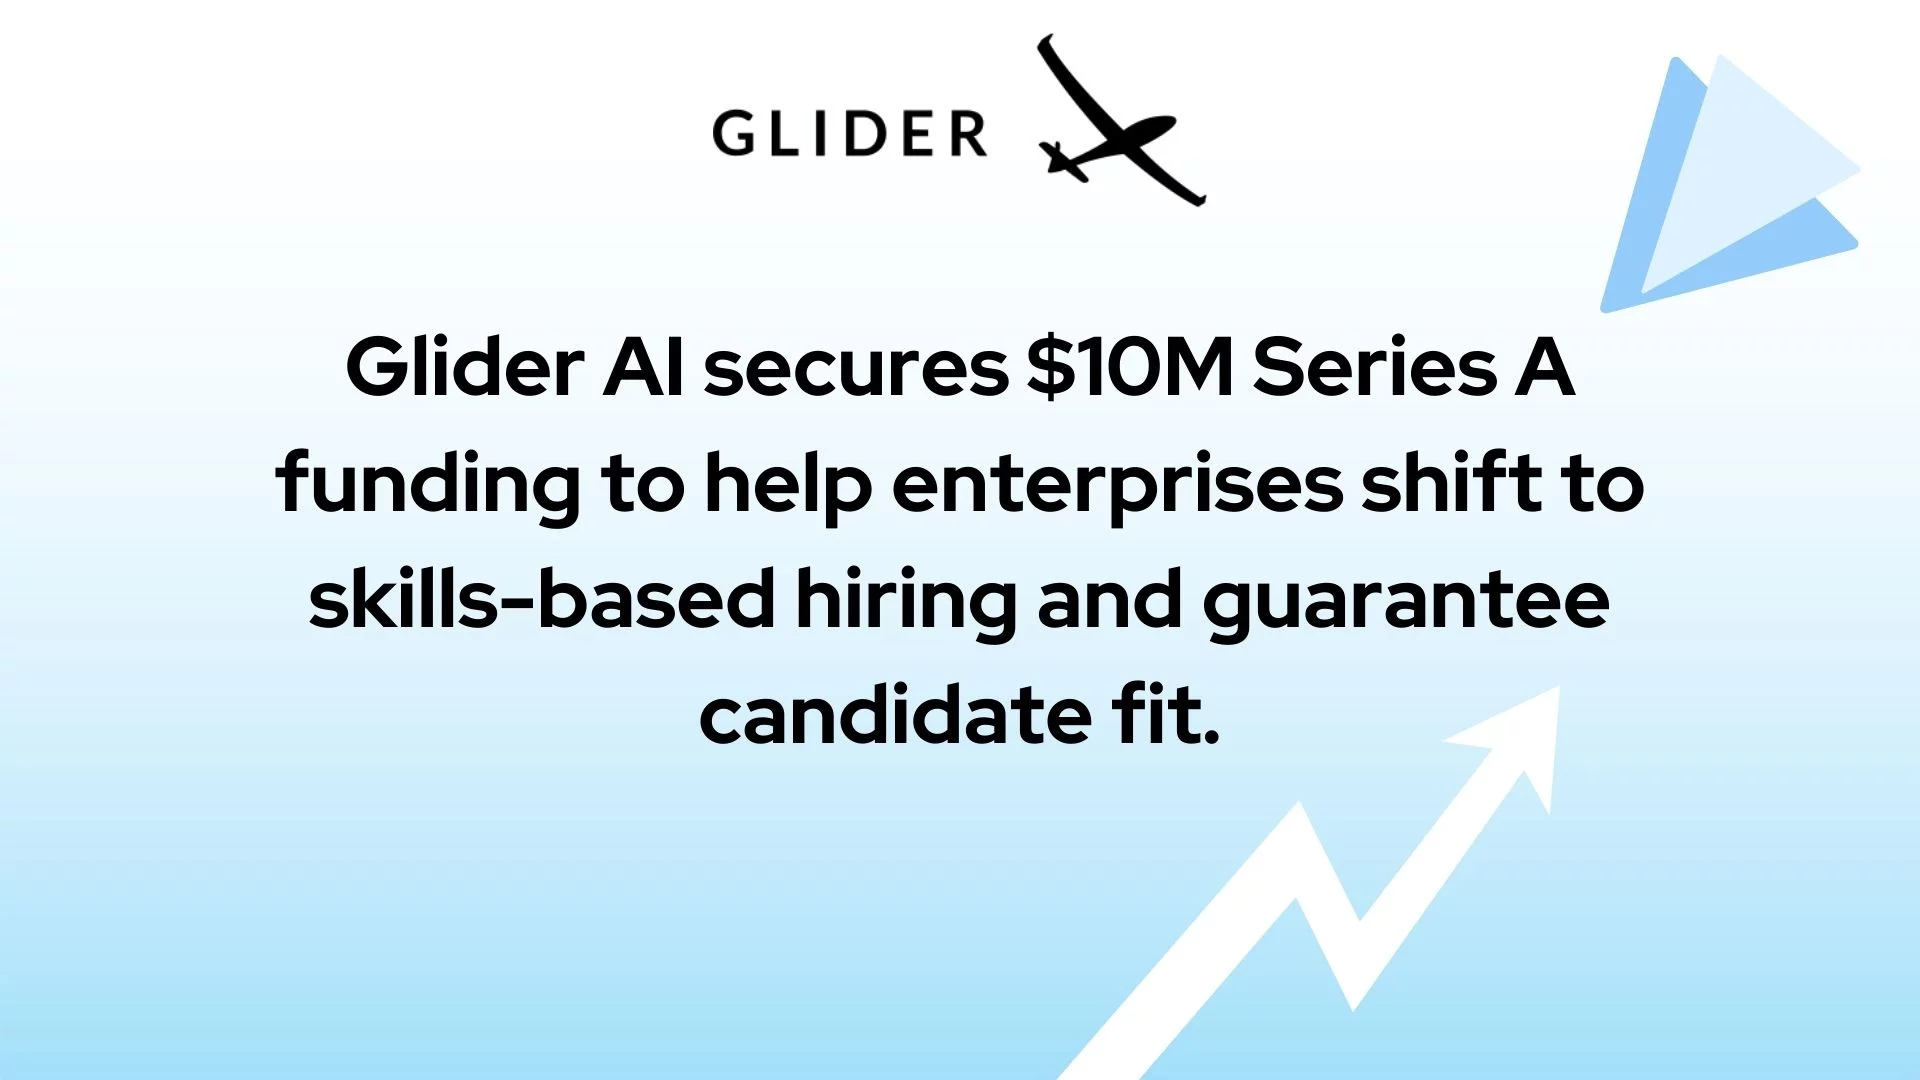 Glider-AI-secures-10M-Series-A-funding-to-help-enterprises-shift-to-skills-based-hiring-and-guarantee-candidate-fit.